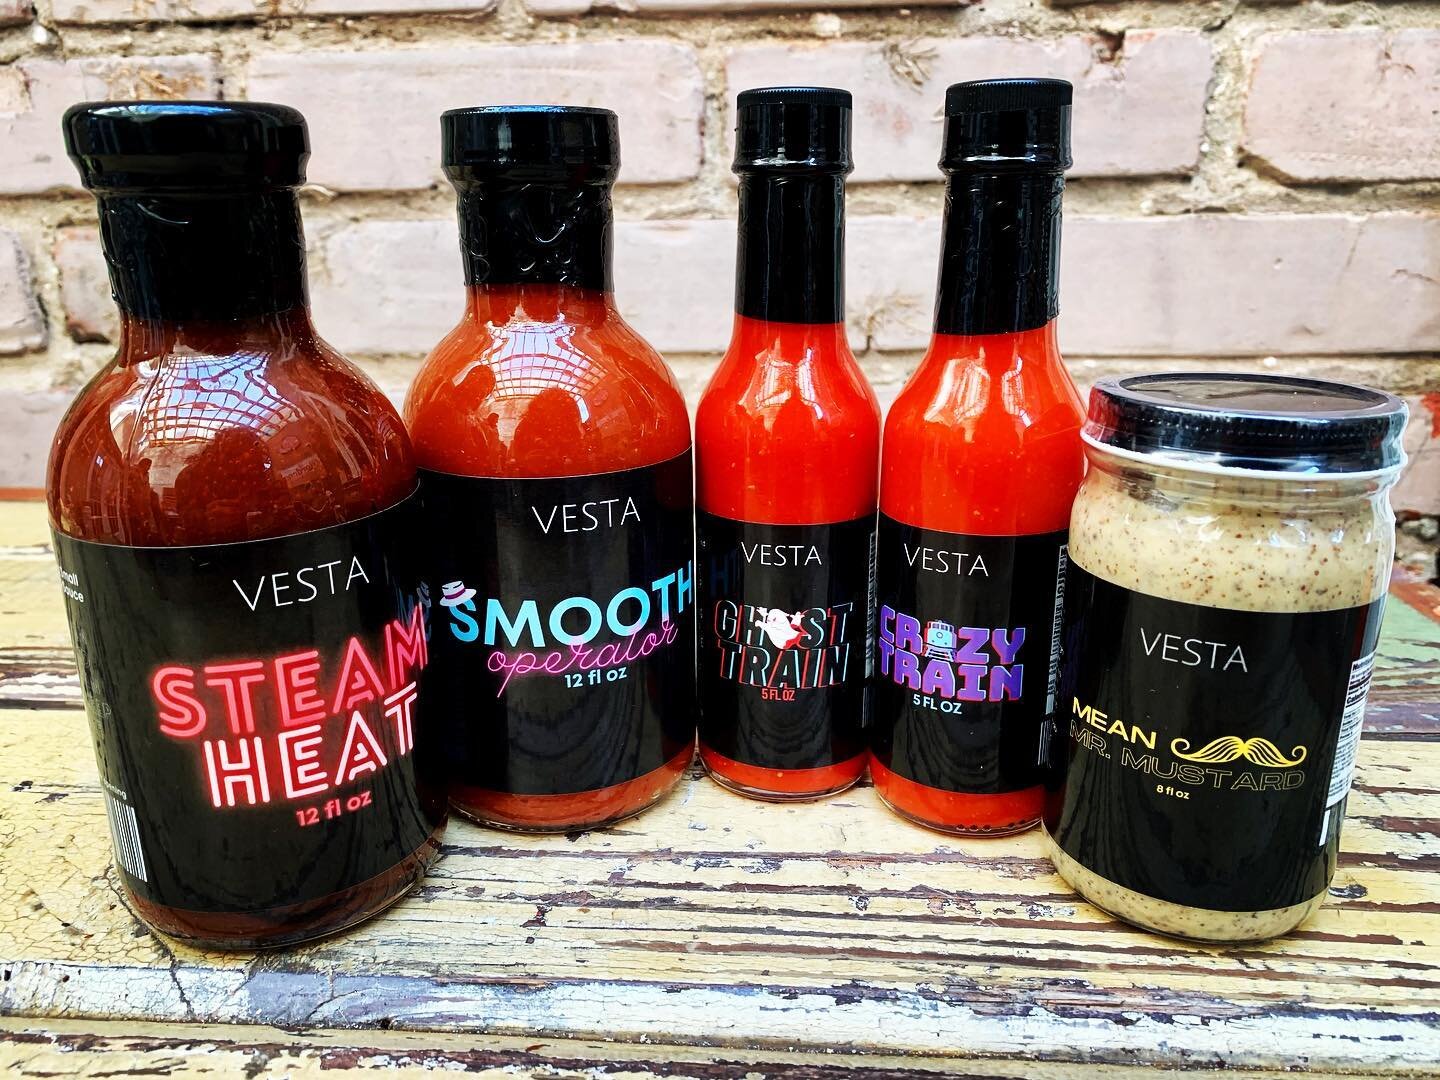 All of our sauces are back in stock and available to order through the link in our bio! Spice up your Valentine&rsquo;s Day with some hot sauce😉🔥🔥
.
All our BBQ sauces are now made with the exceptional tomatoes from our friends at @firstfield ❤️❤️